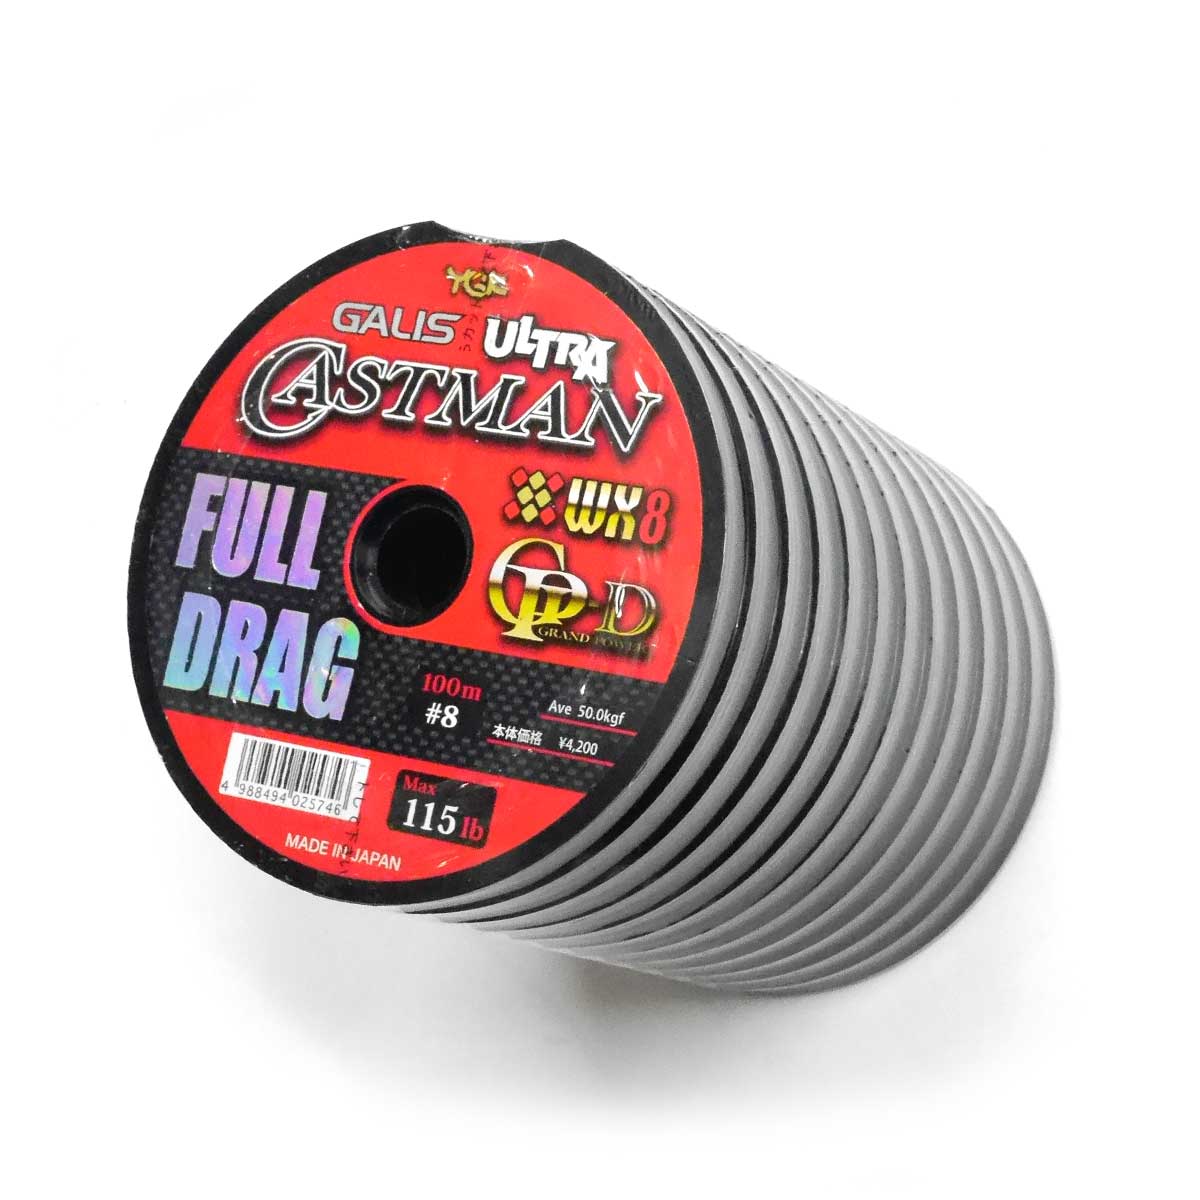 YGK Galis Castman Full Drag WX8 braided line - how to use